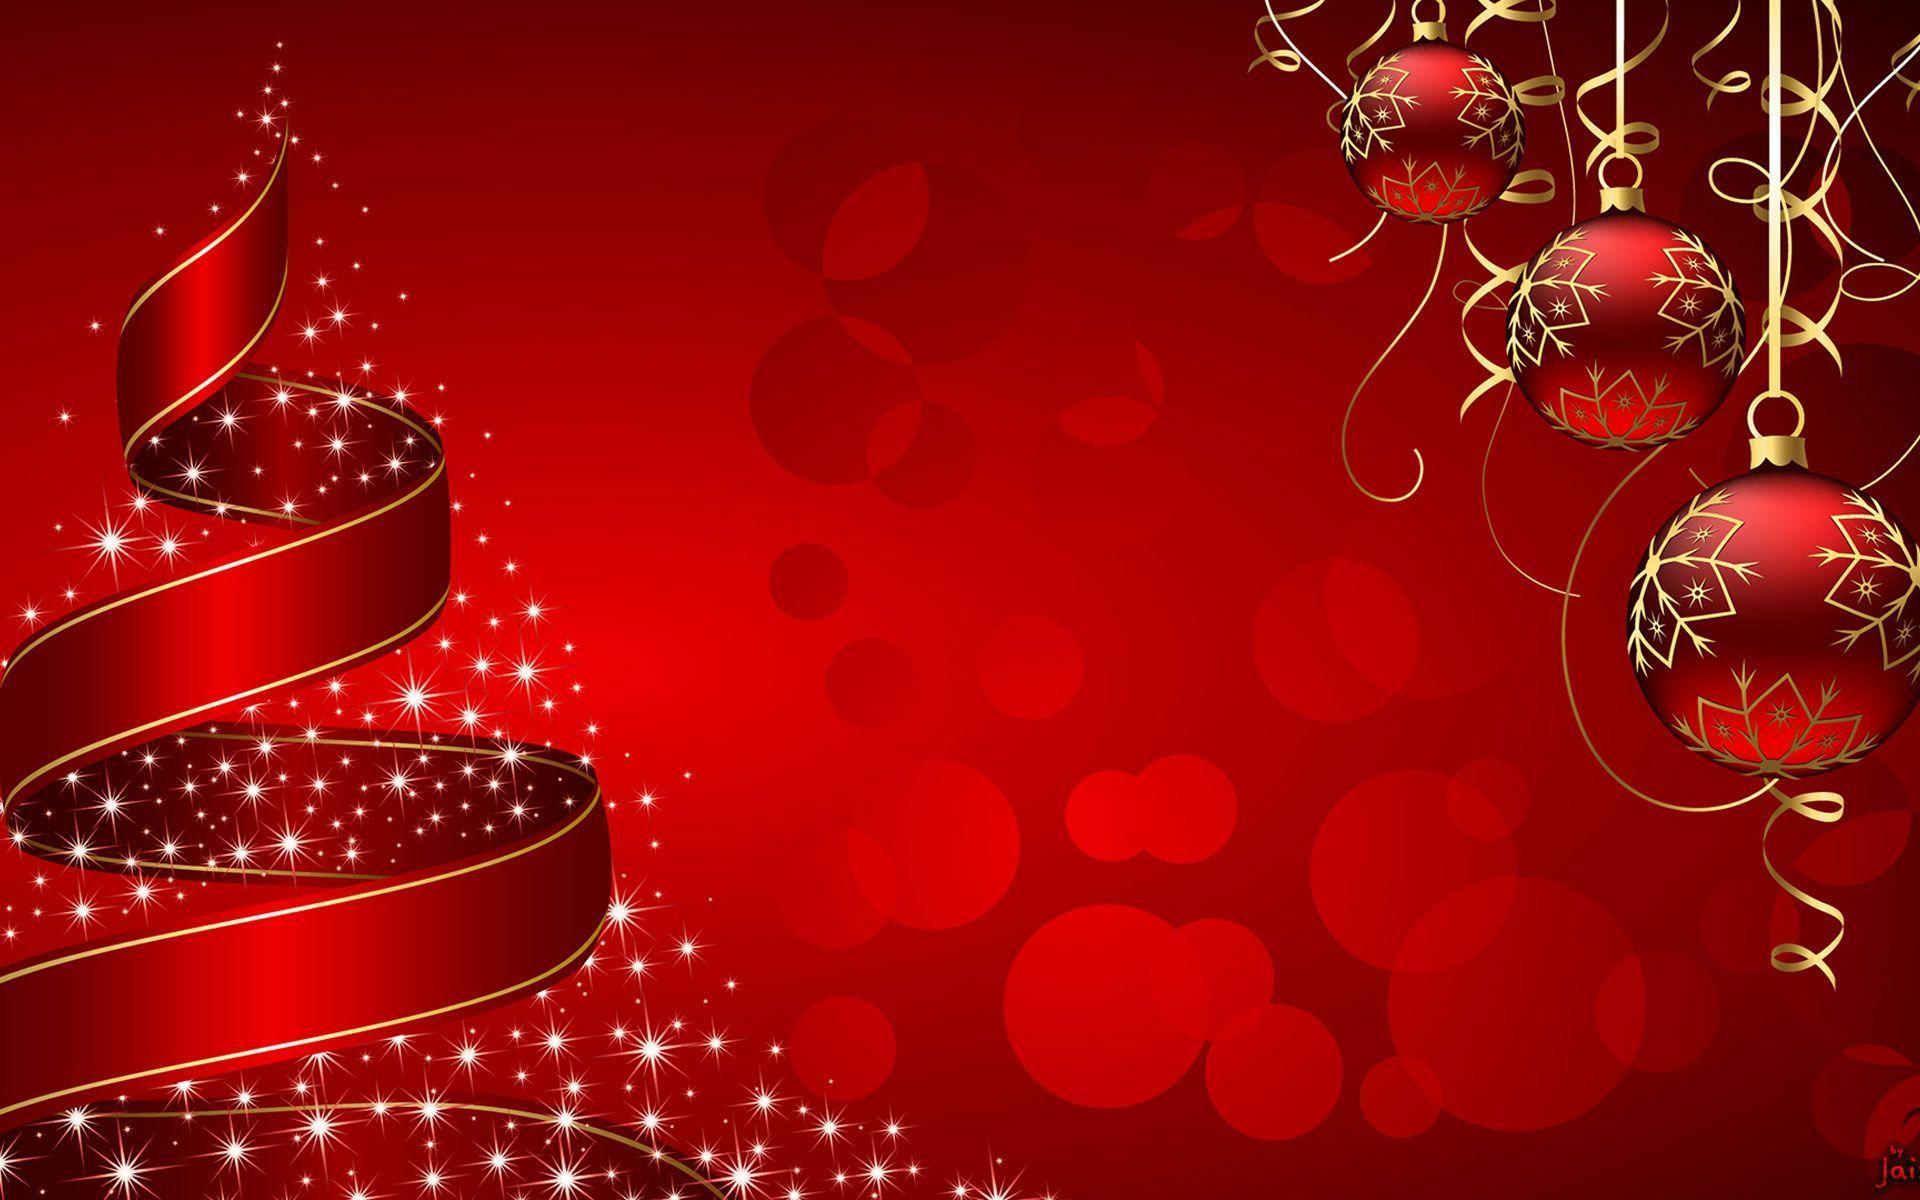 Christmas Tree Wallpapers Free - Wallpaper Cave